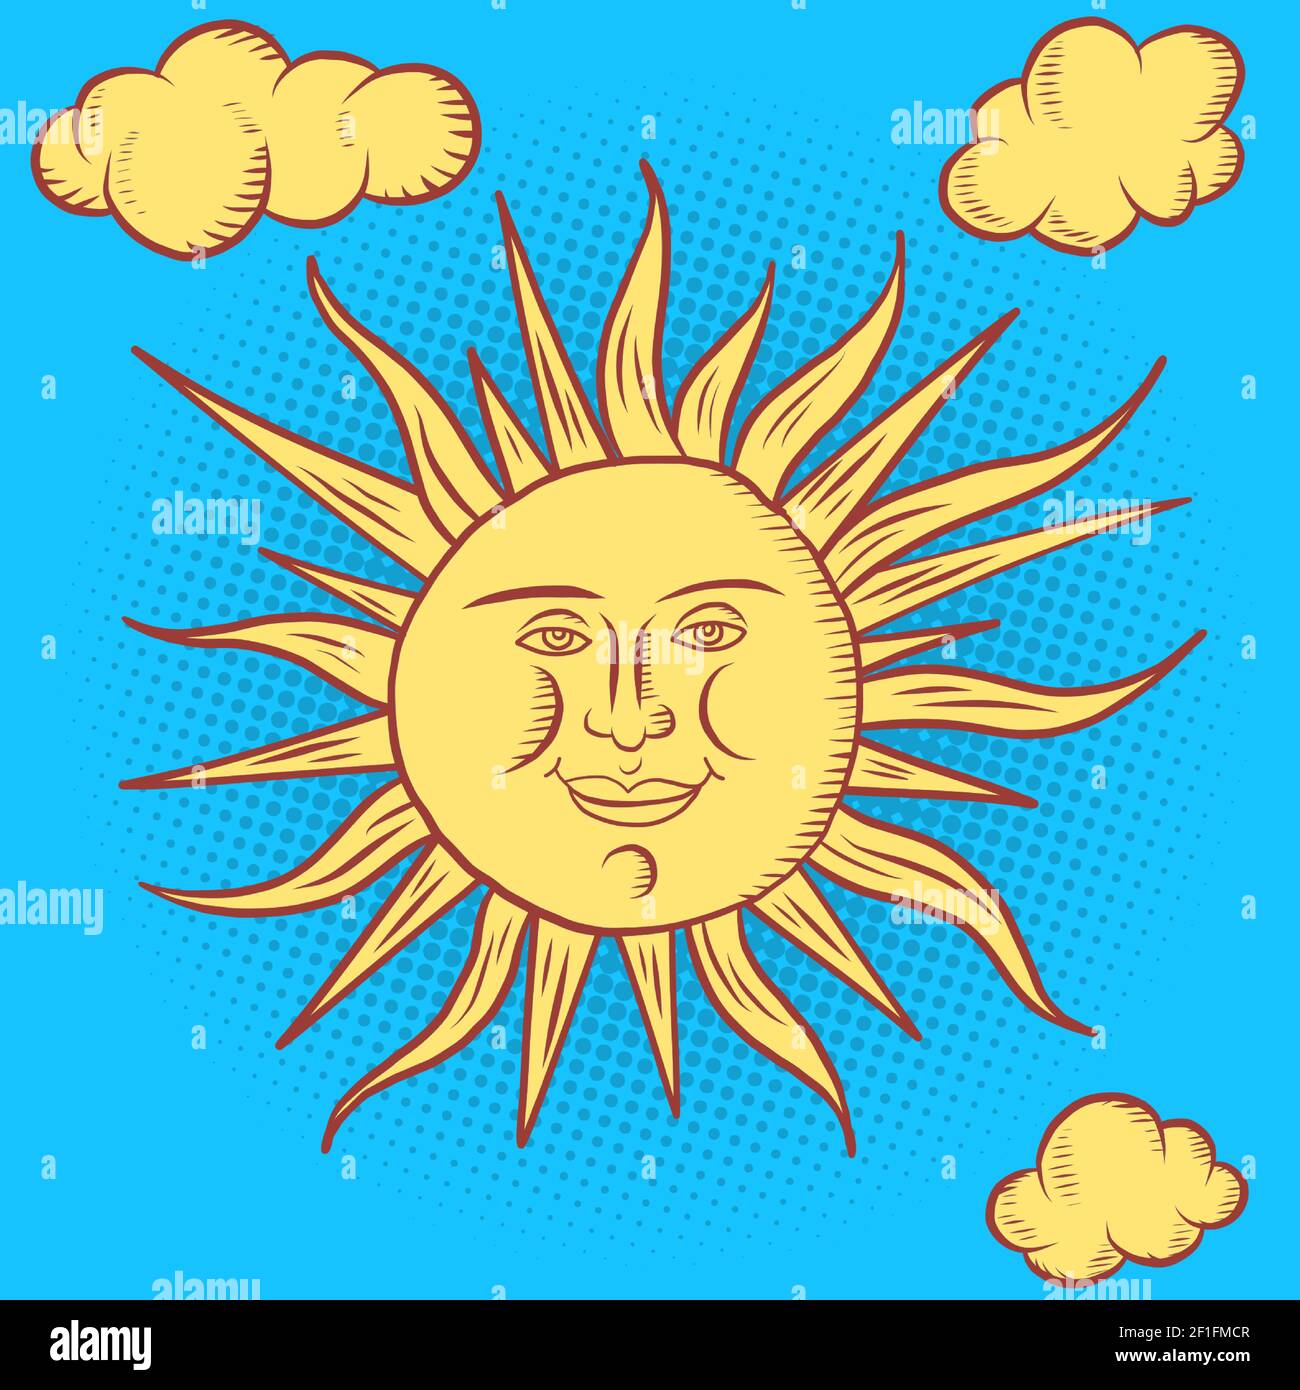 sun character. round face stylized retro style Stock Vector